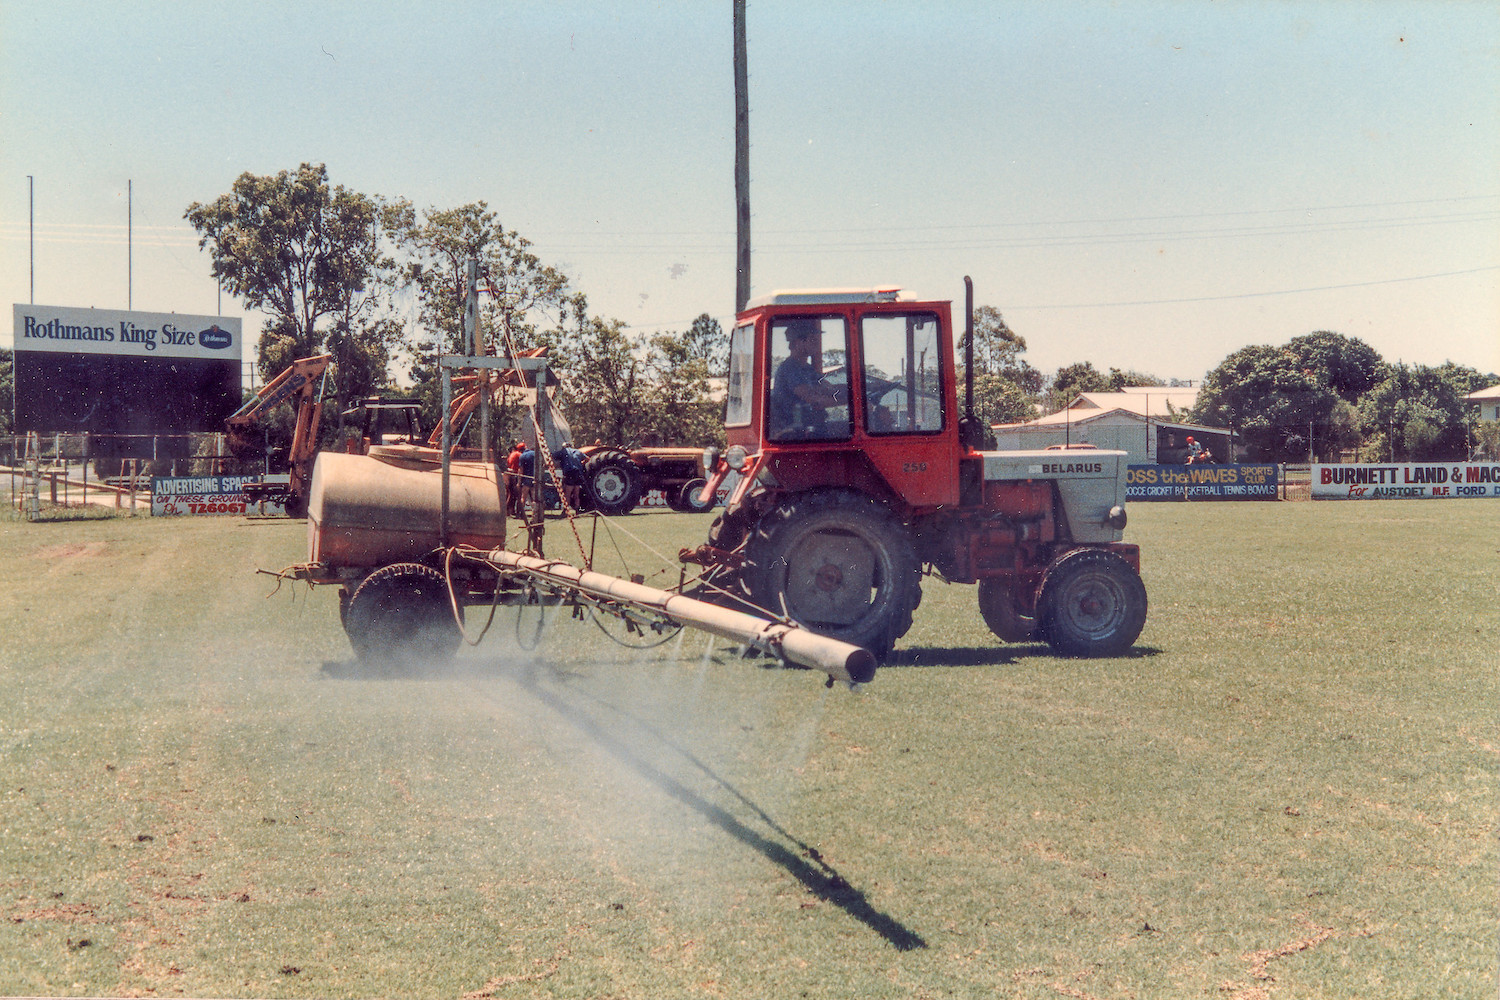 Spraying chlorpyrifos on a field in 1987